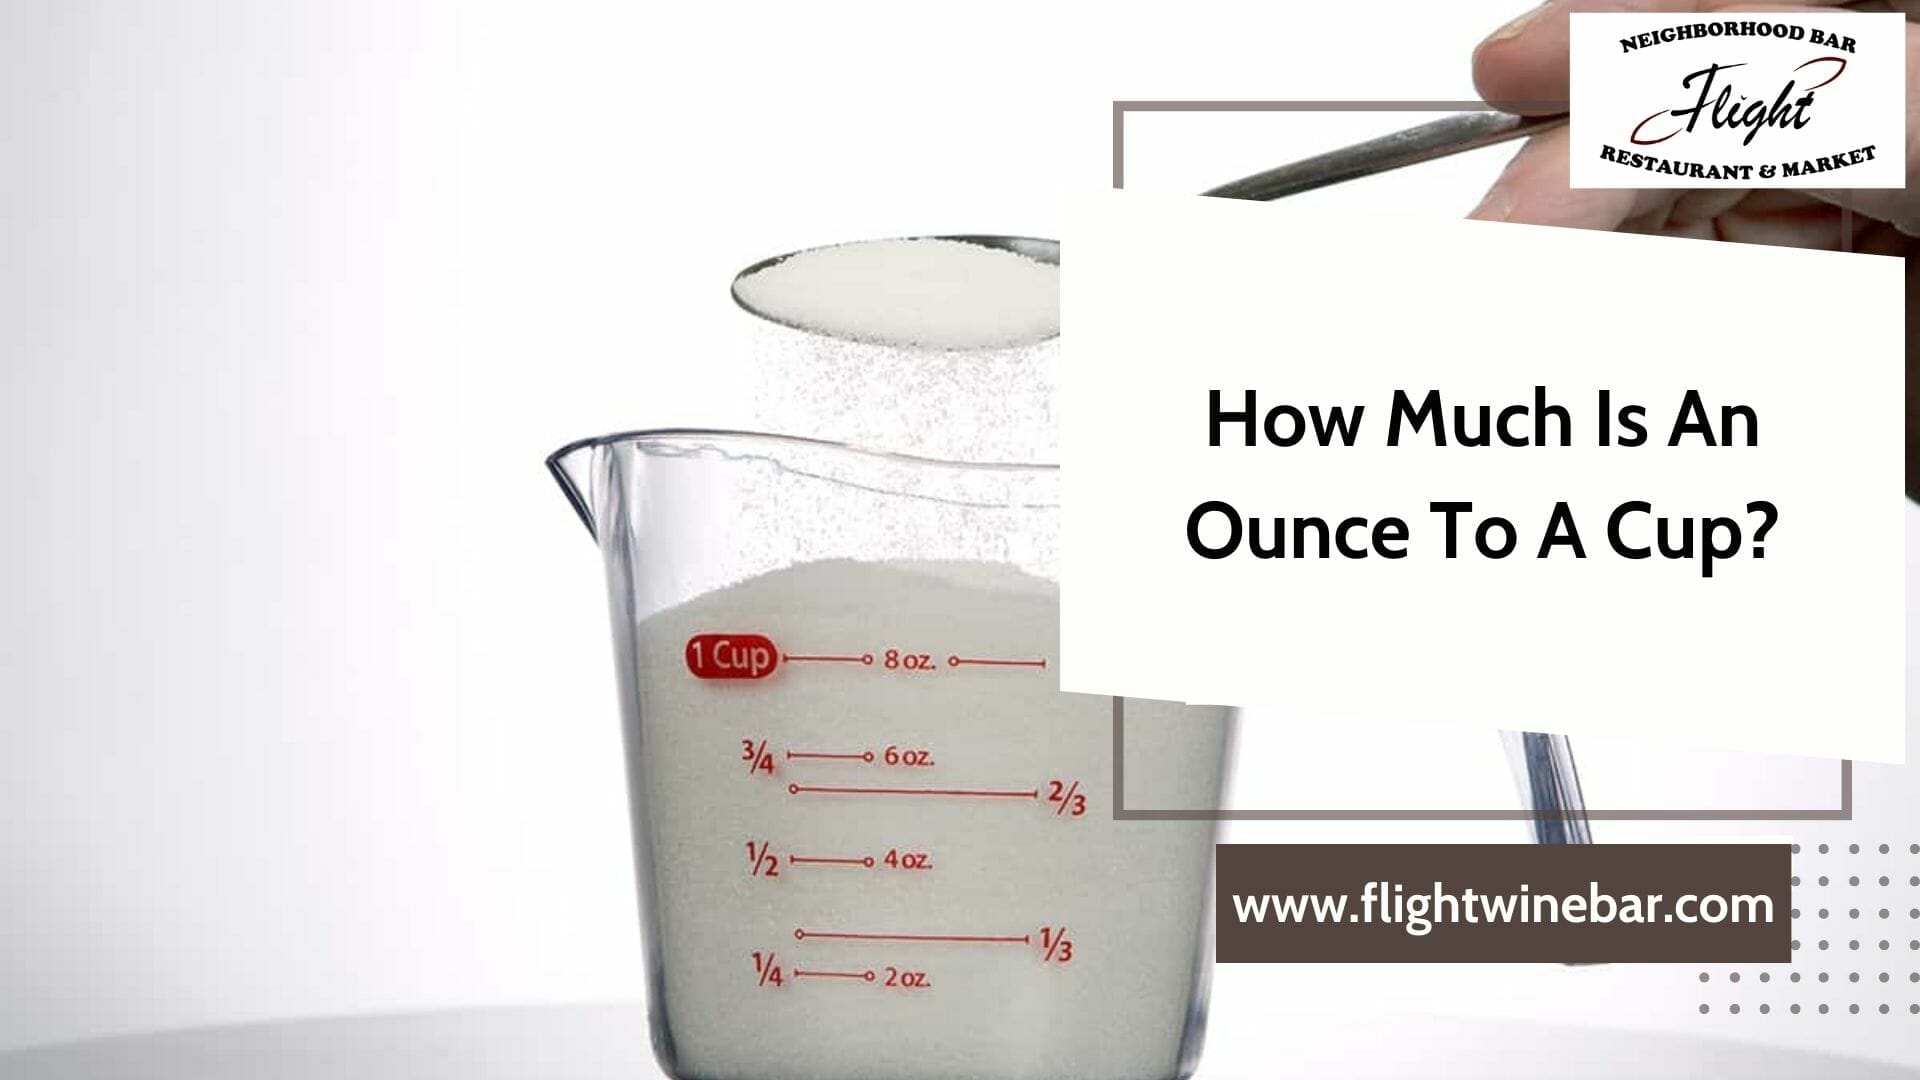 How Much Is An Ounce To A Cup